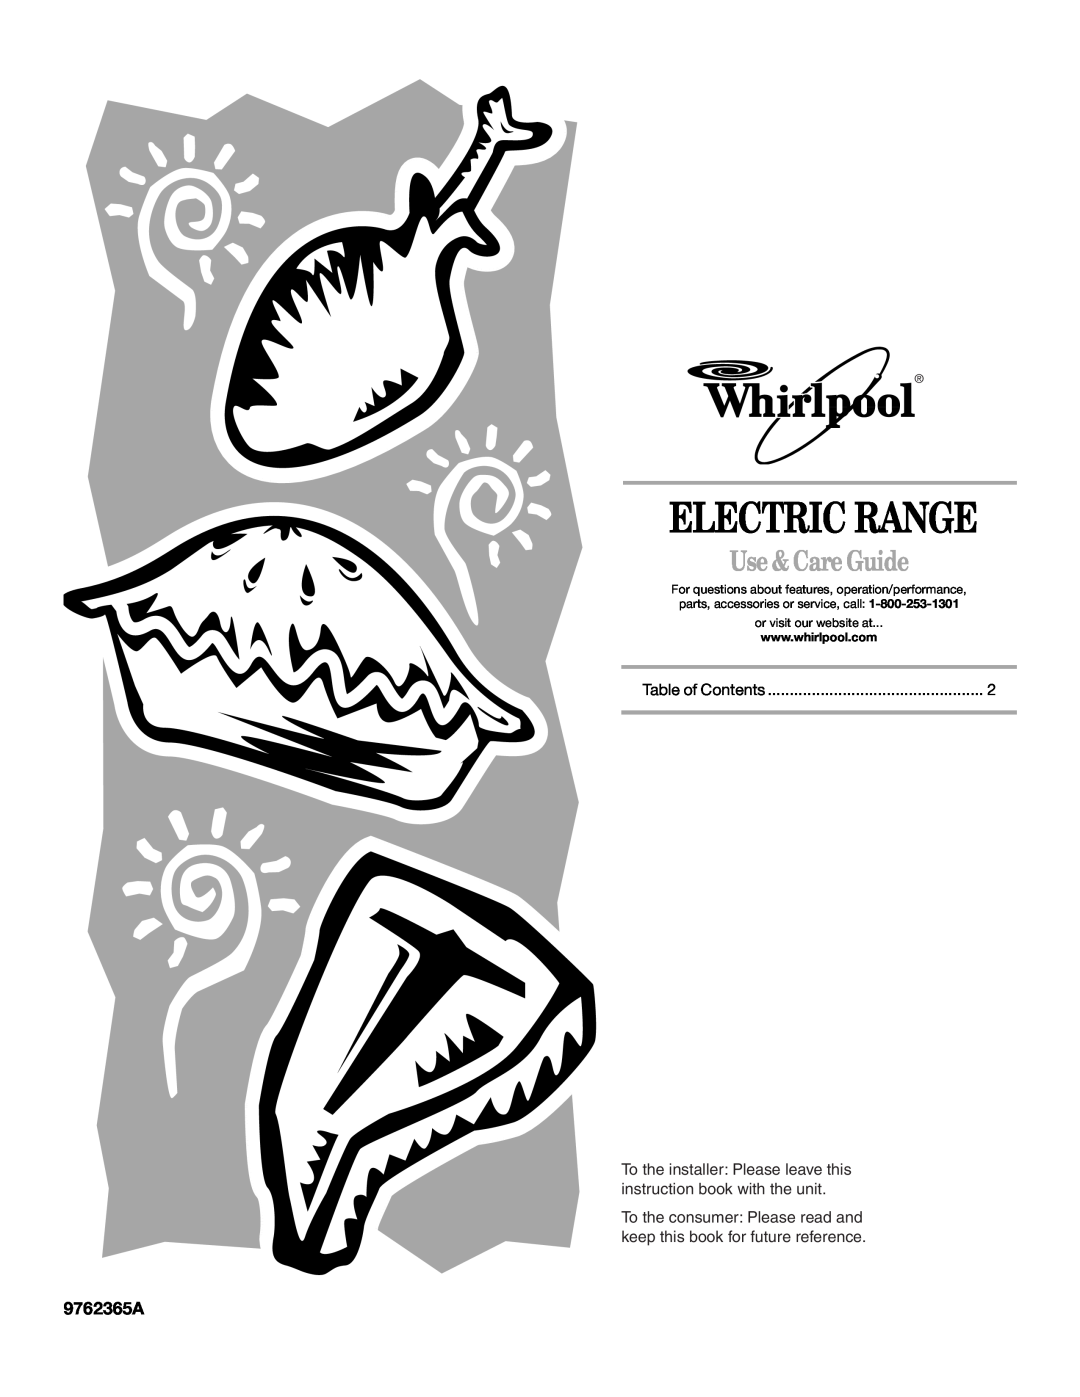 Whirlpool manual Use & Care Guide, 9762365A, Electric Range, or visit our website at 